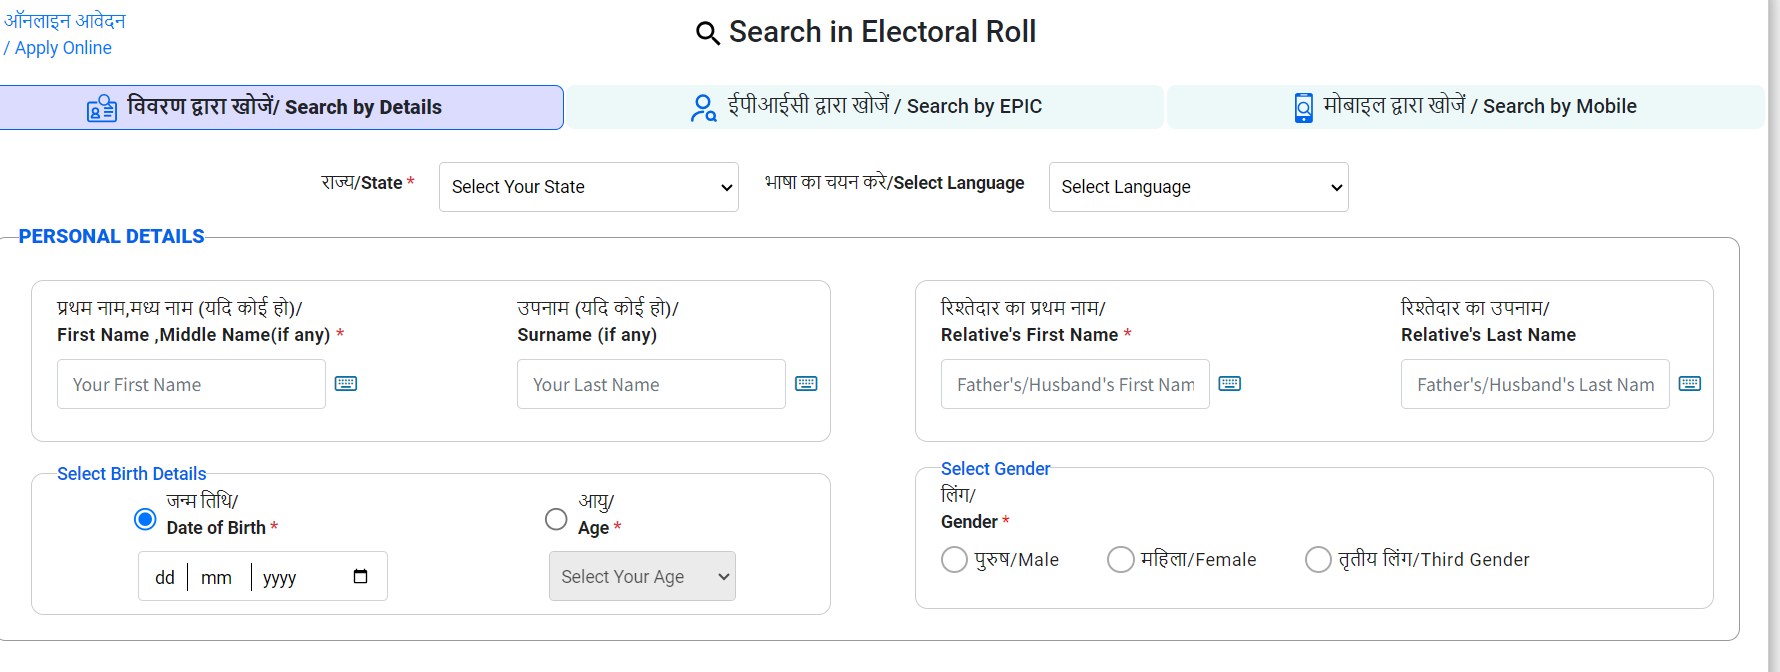 Search IN Electoral Roll